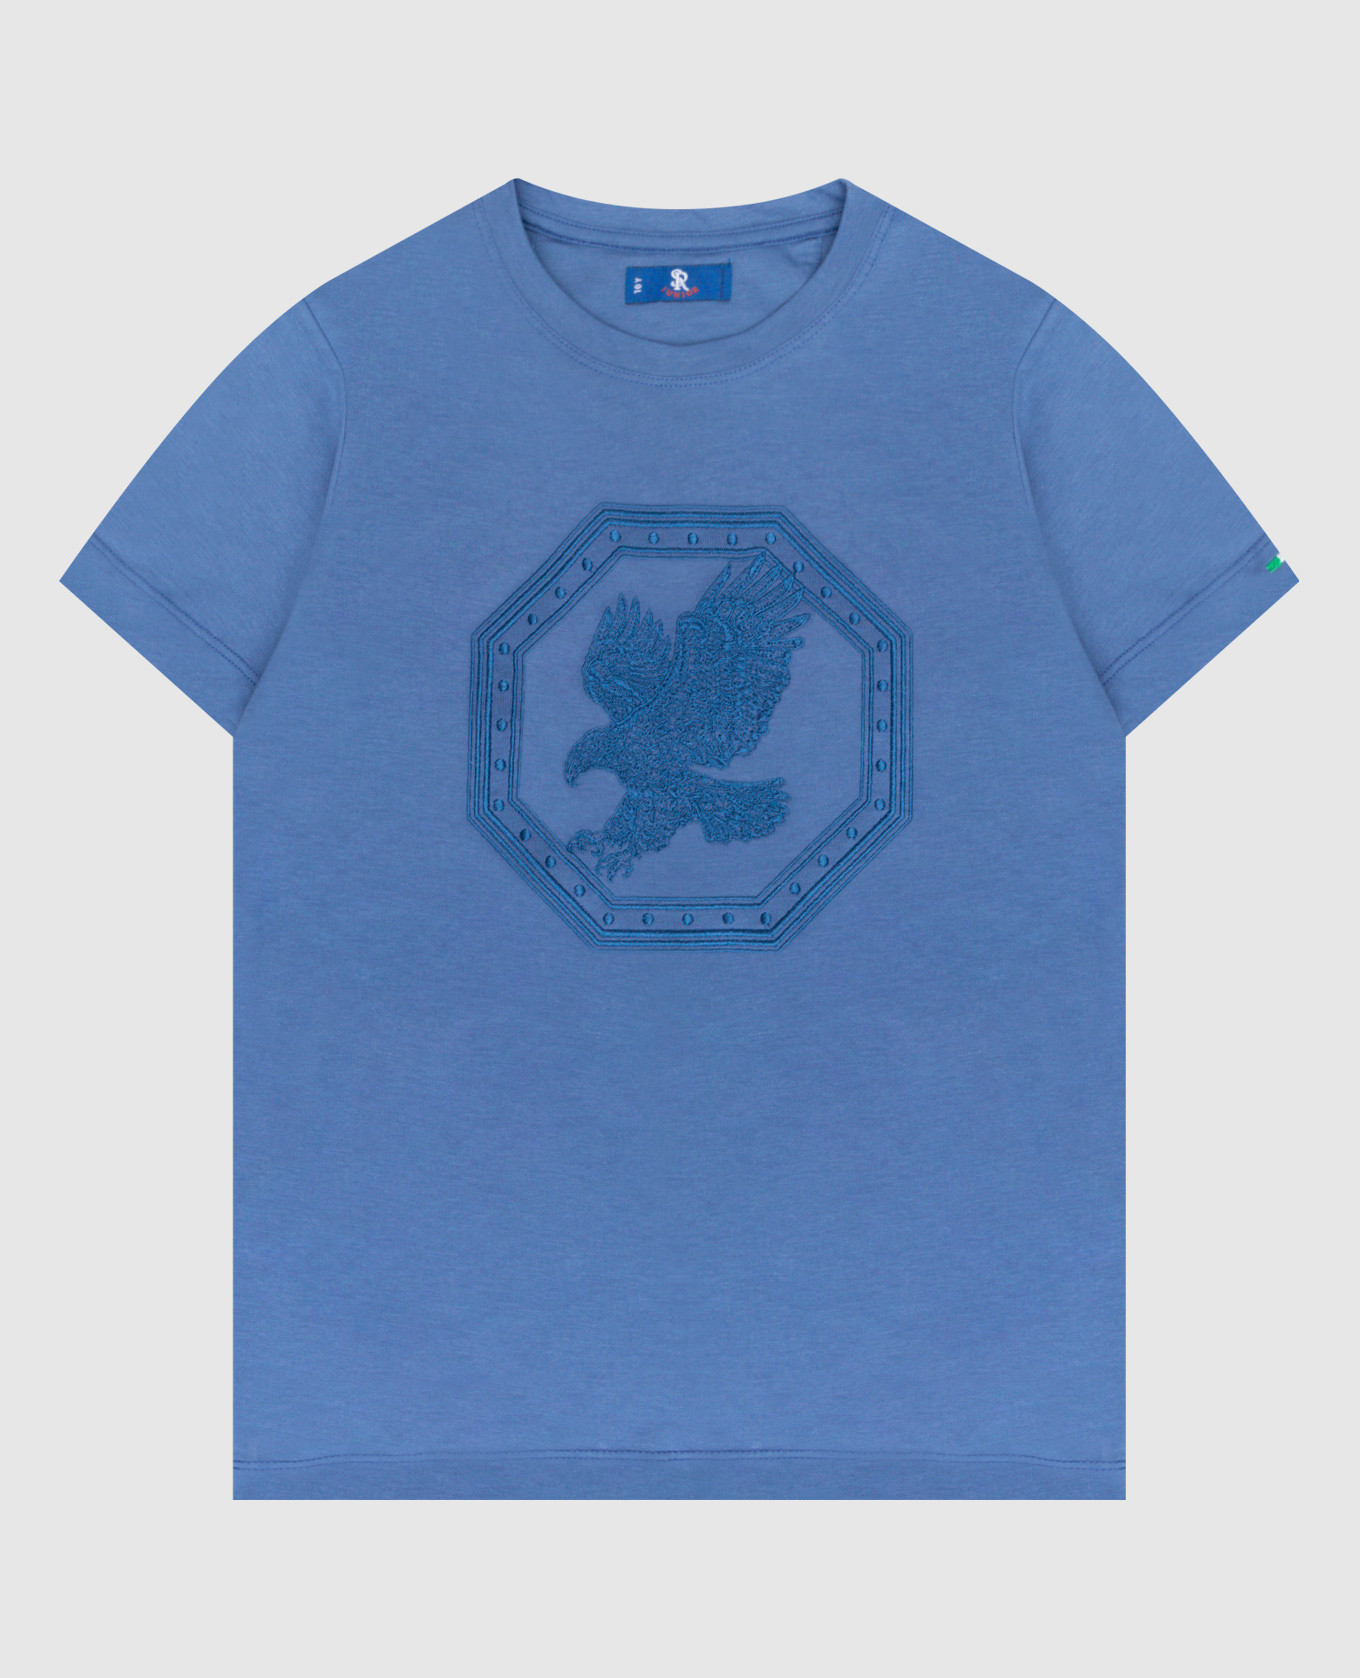 Children's blue t-shirt with eagle embroidery